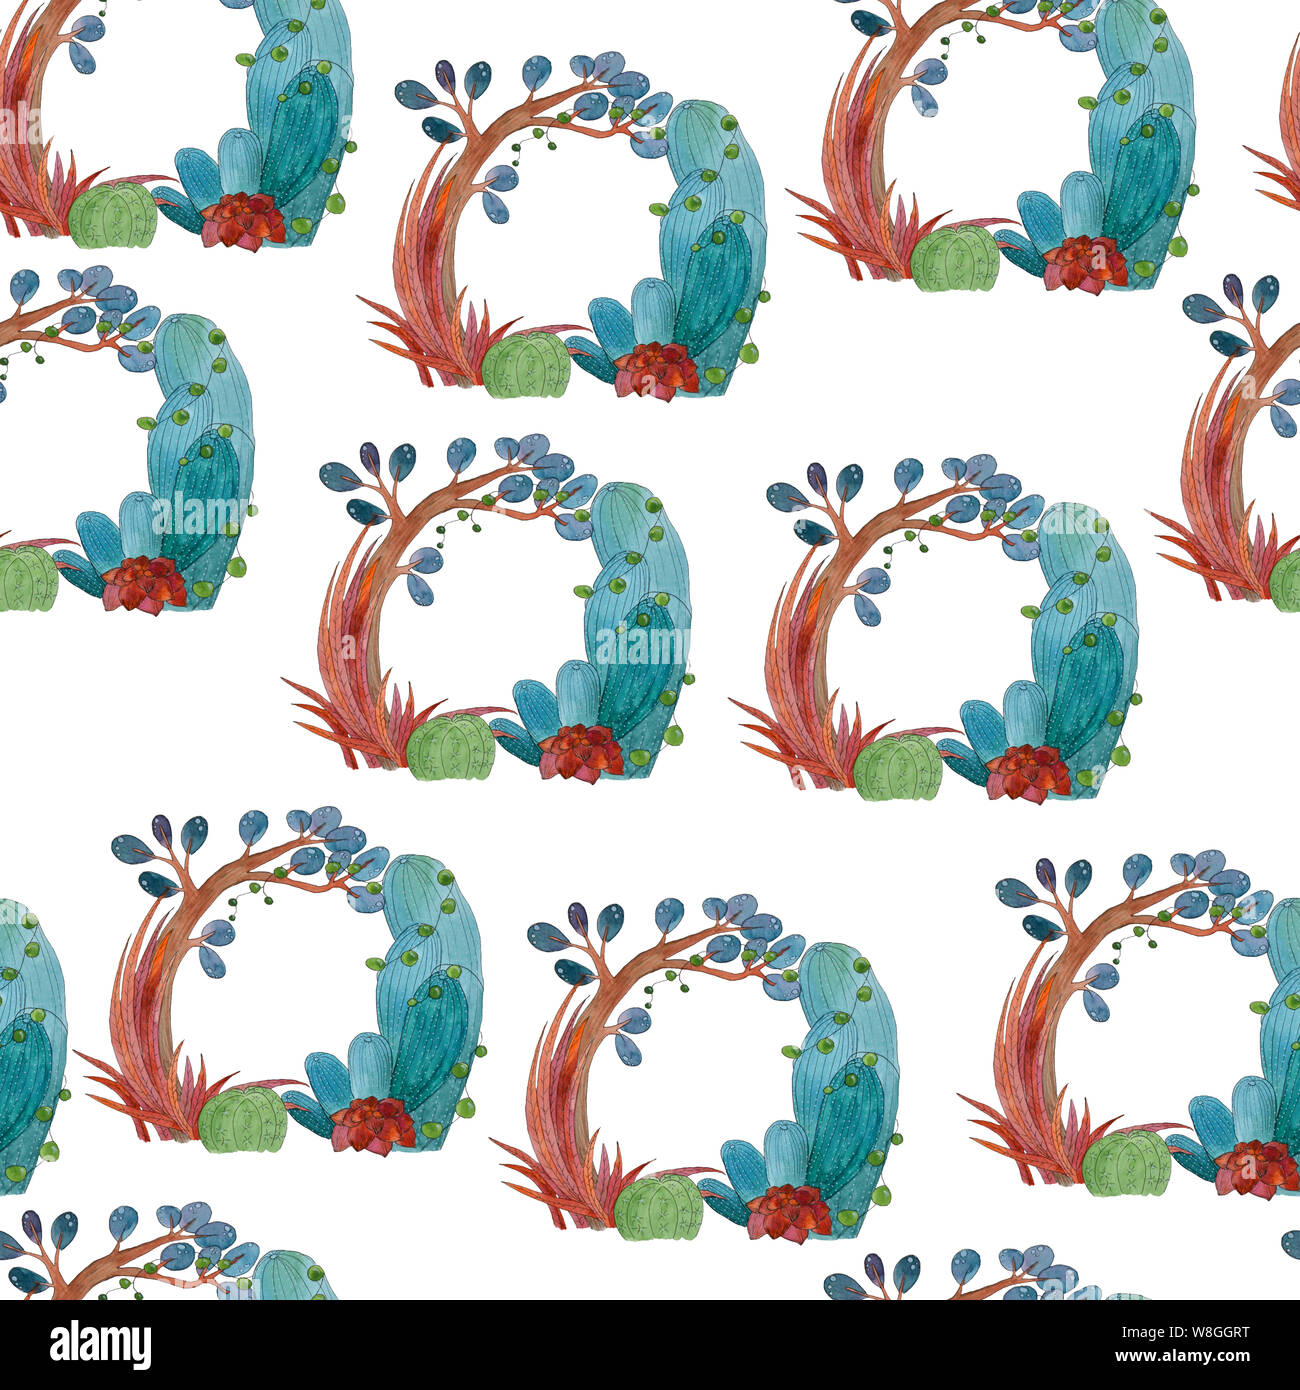 Seamless watercolor cactus pattern on white background Stock Photo